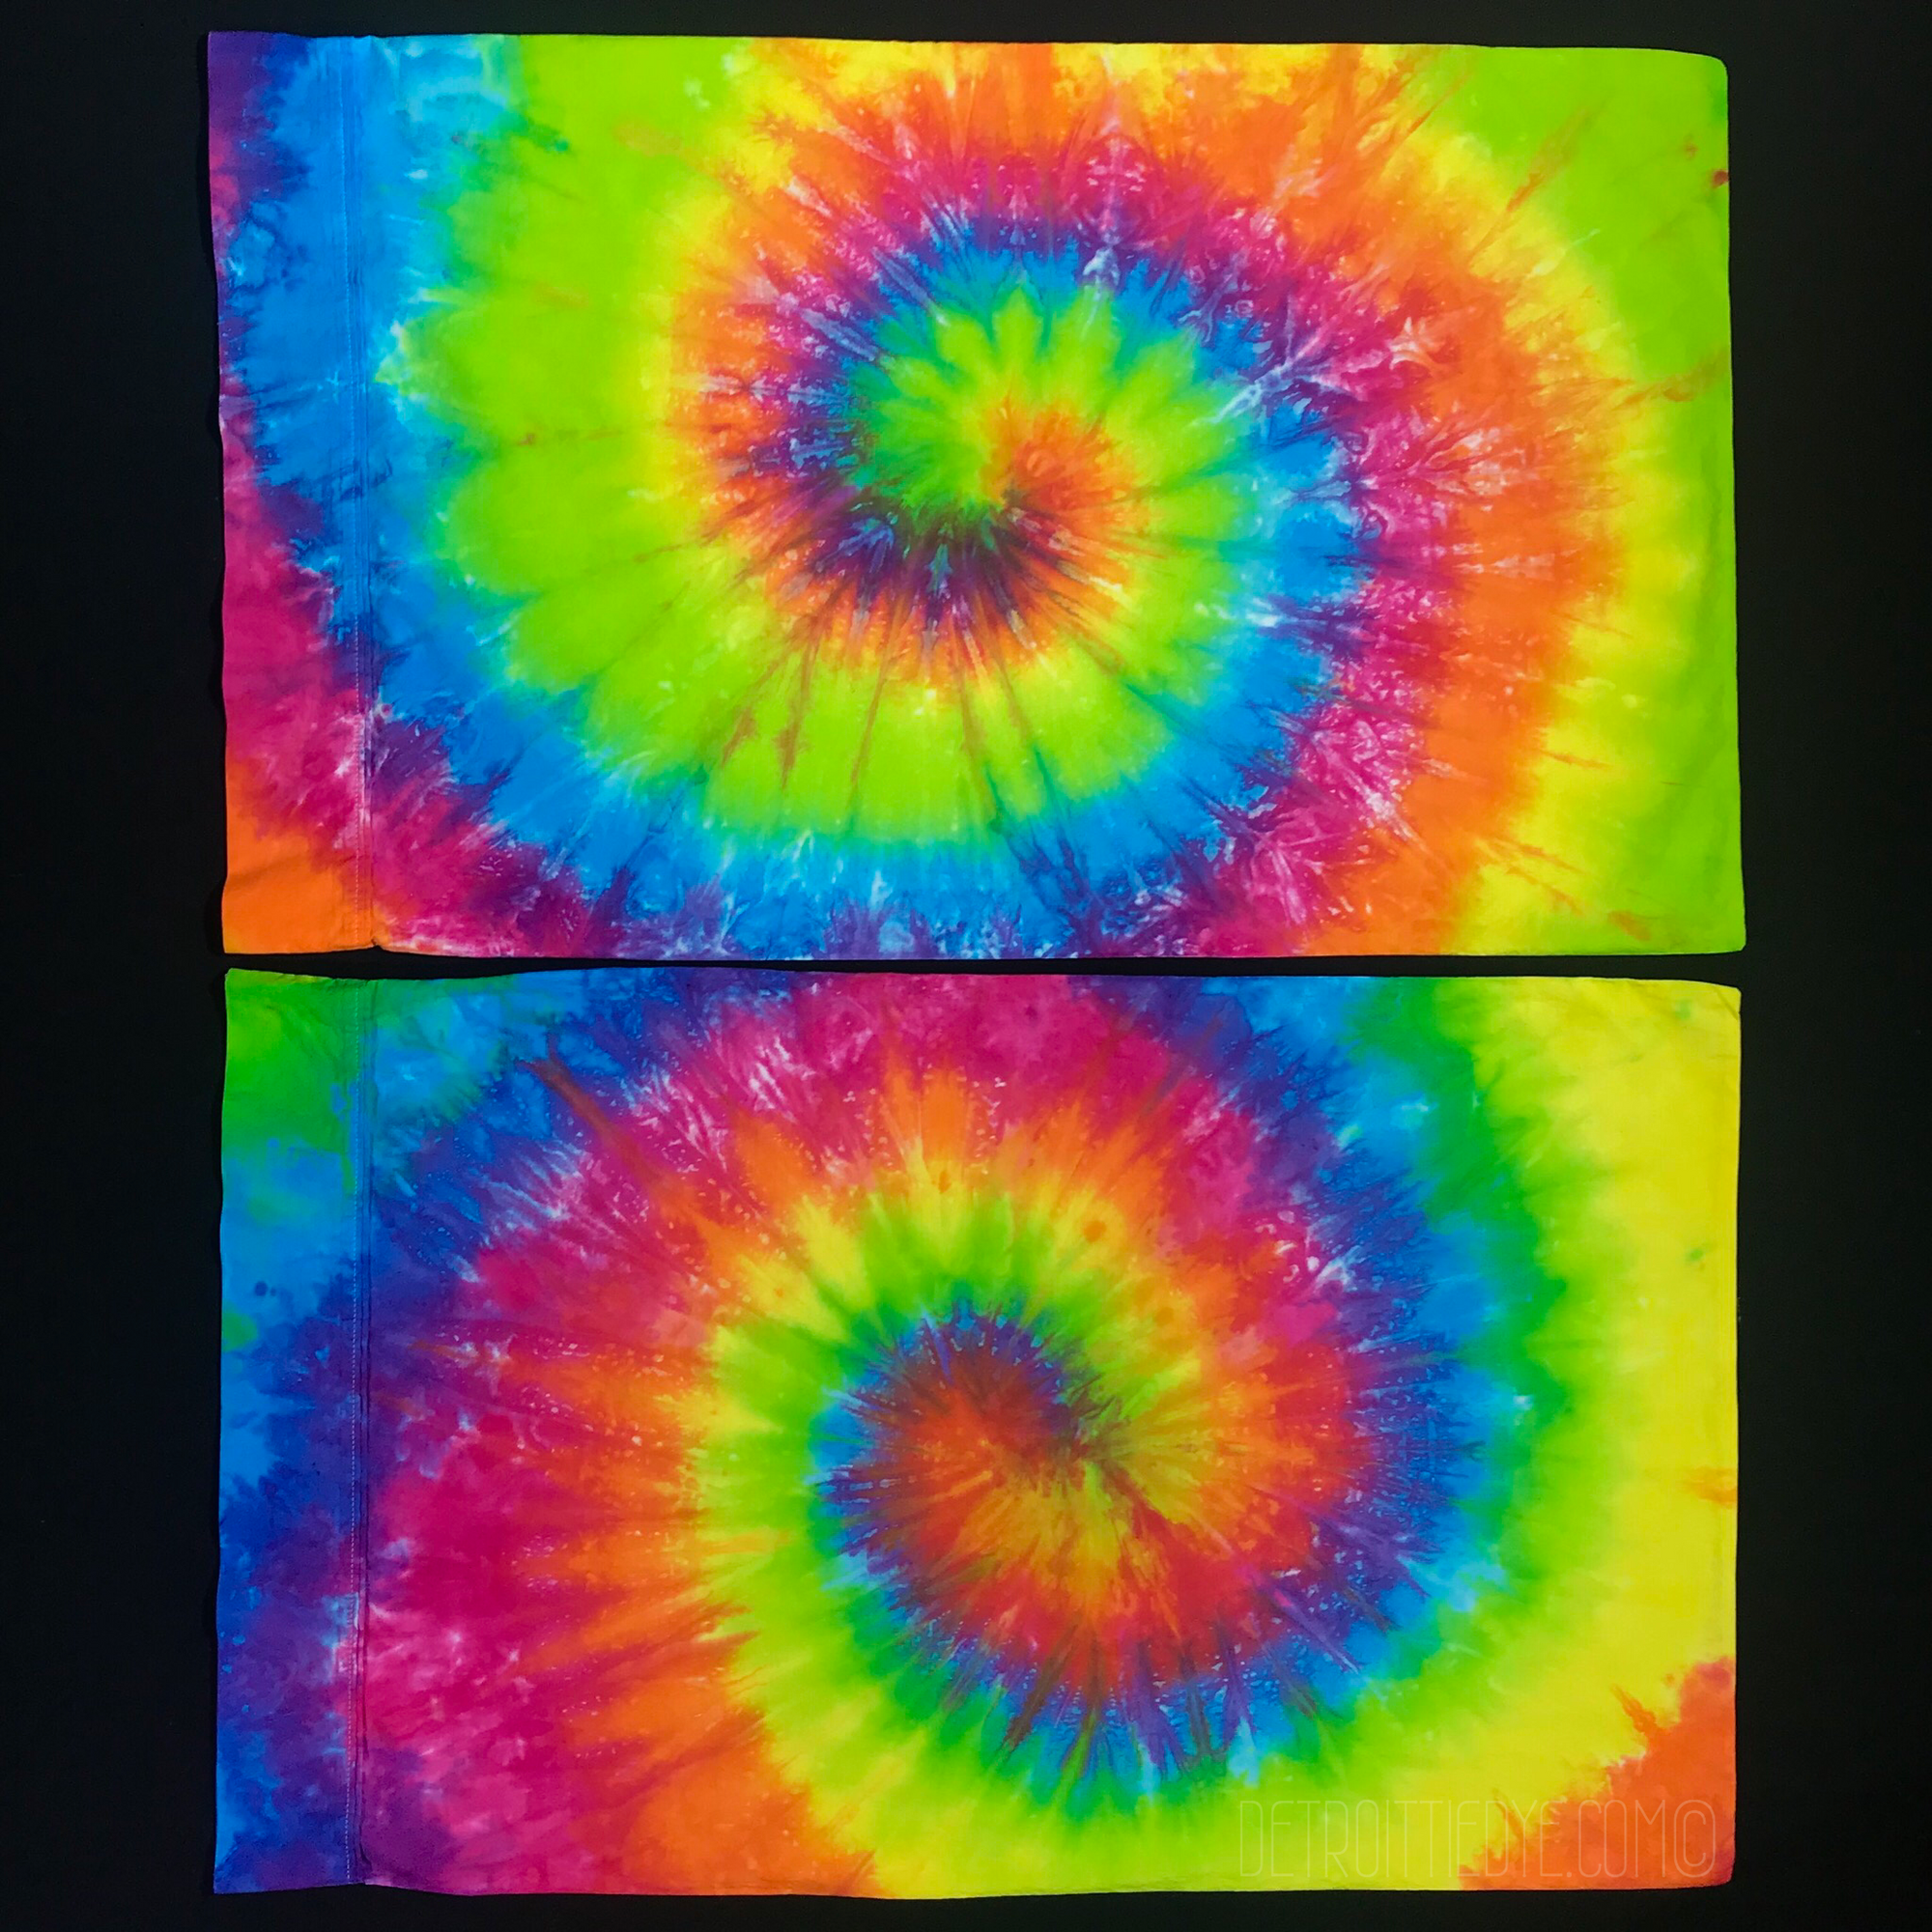 a set of two custom, handmade to order neon rainbow pillowcases featuring: Hot pink, orange, fluorescent yellow, lime green, electric blue tie dye pillowcases